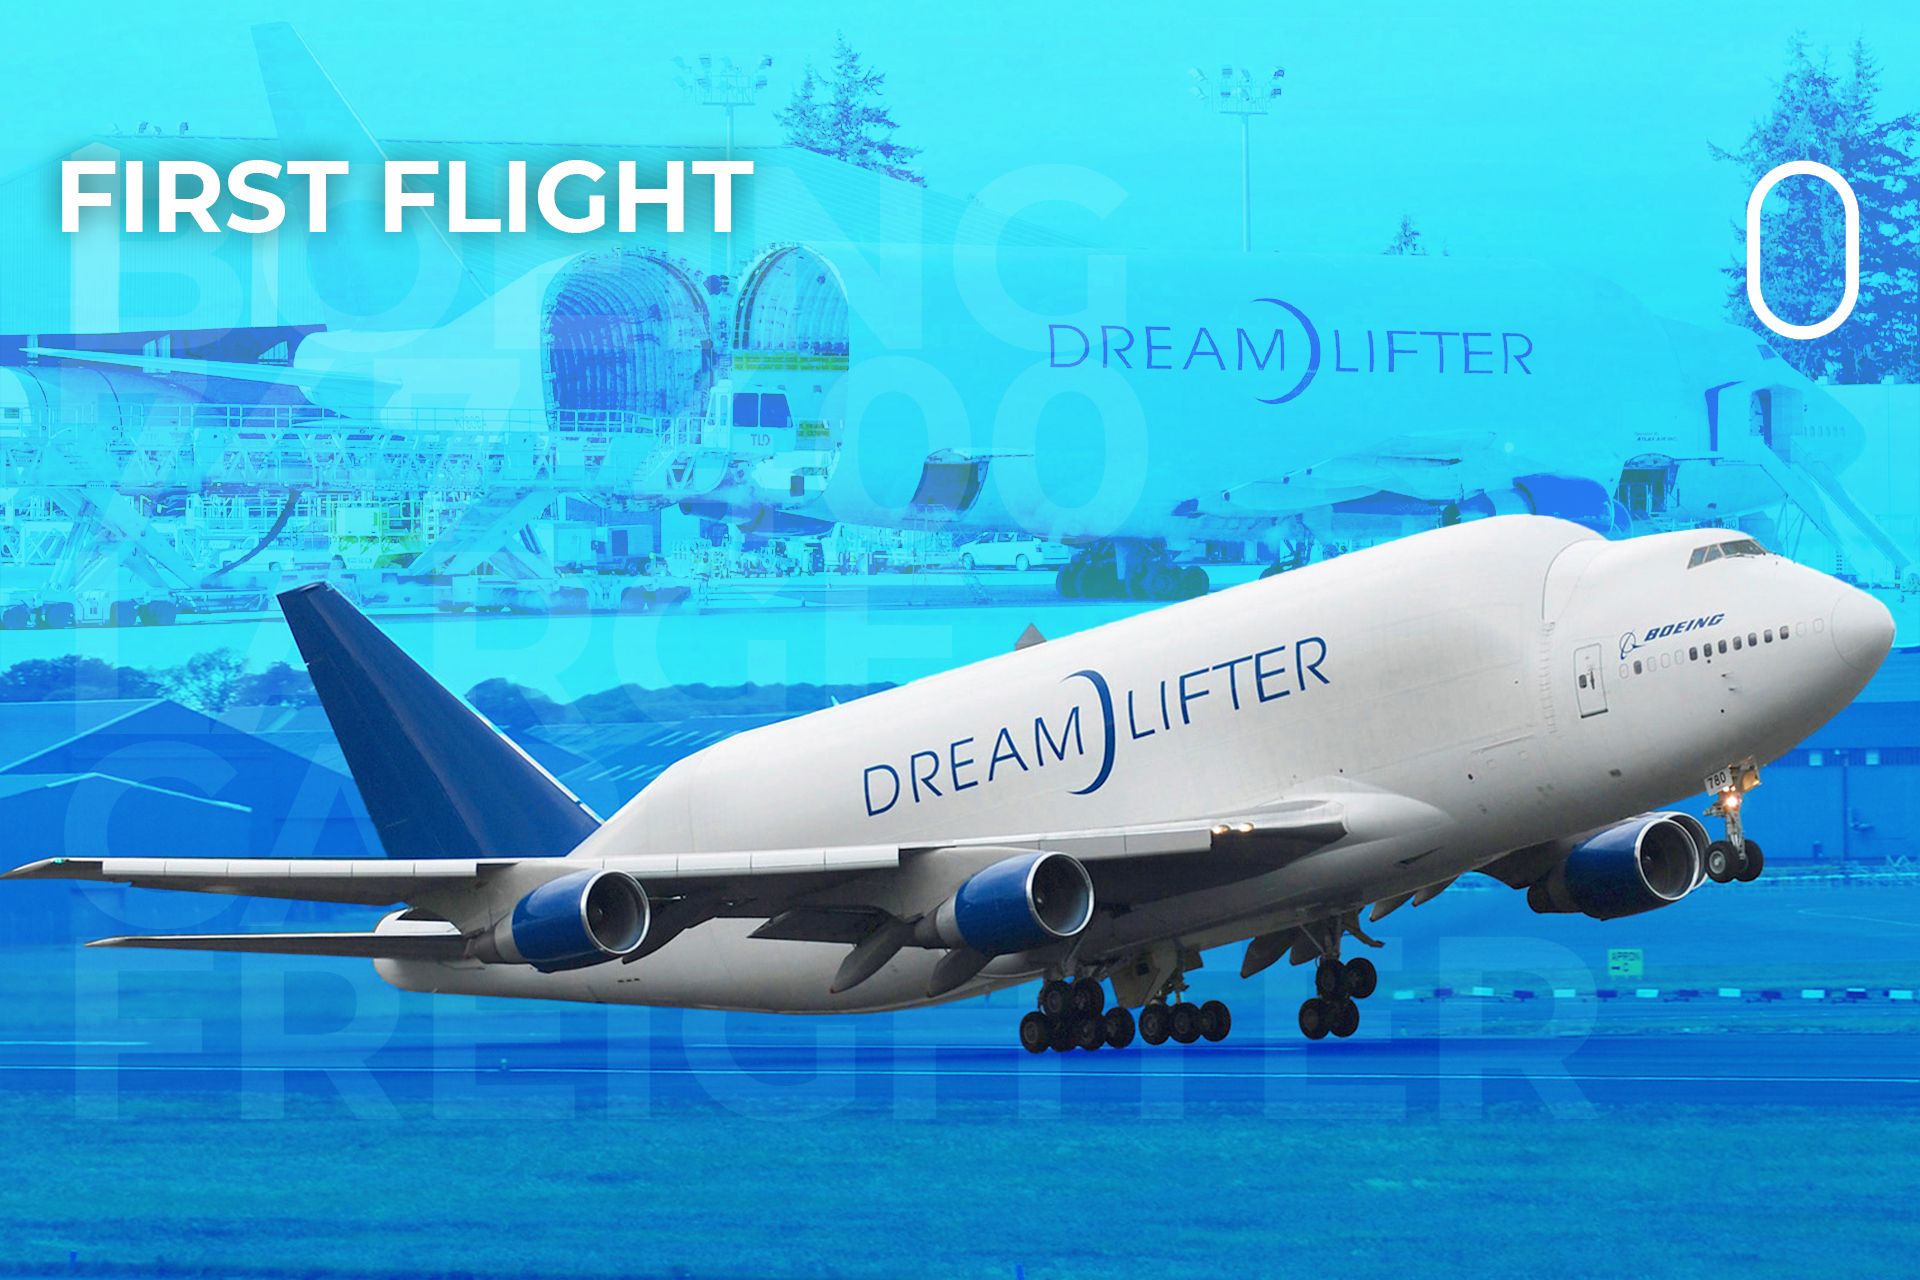 Boeing's Outsize 'Dreamlifter' Freighter Made Its First Flight On 